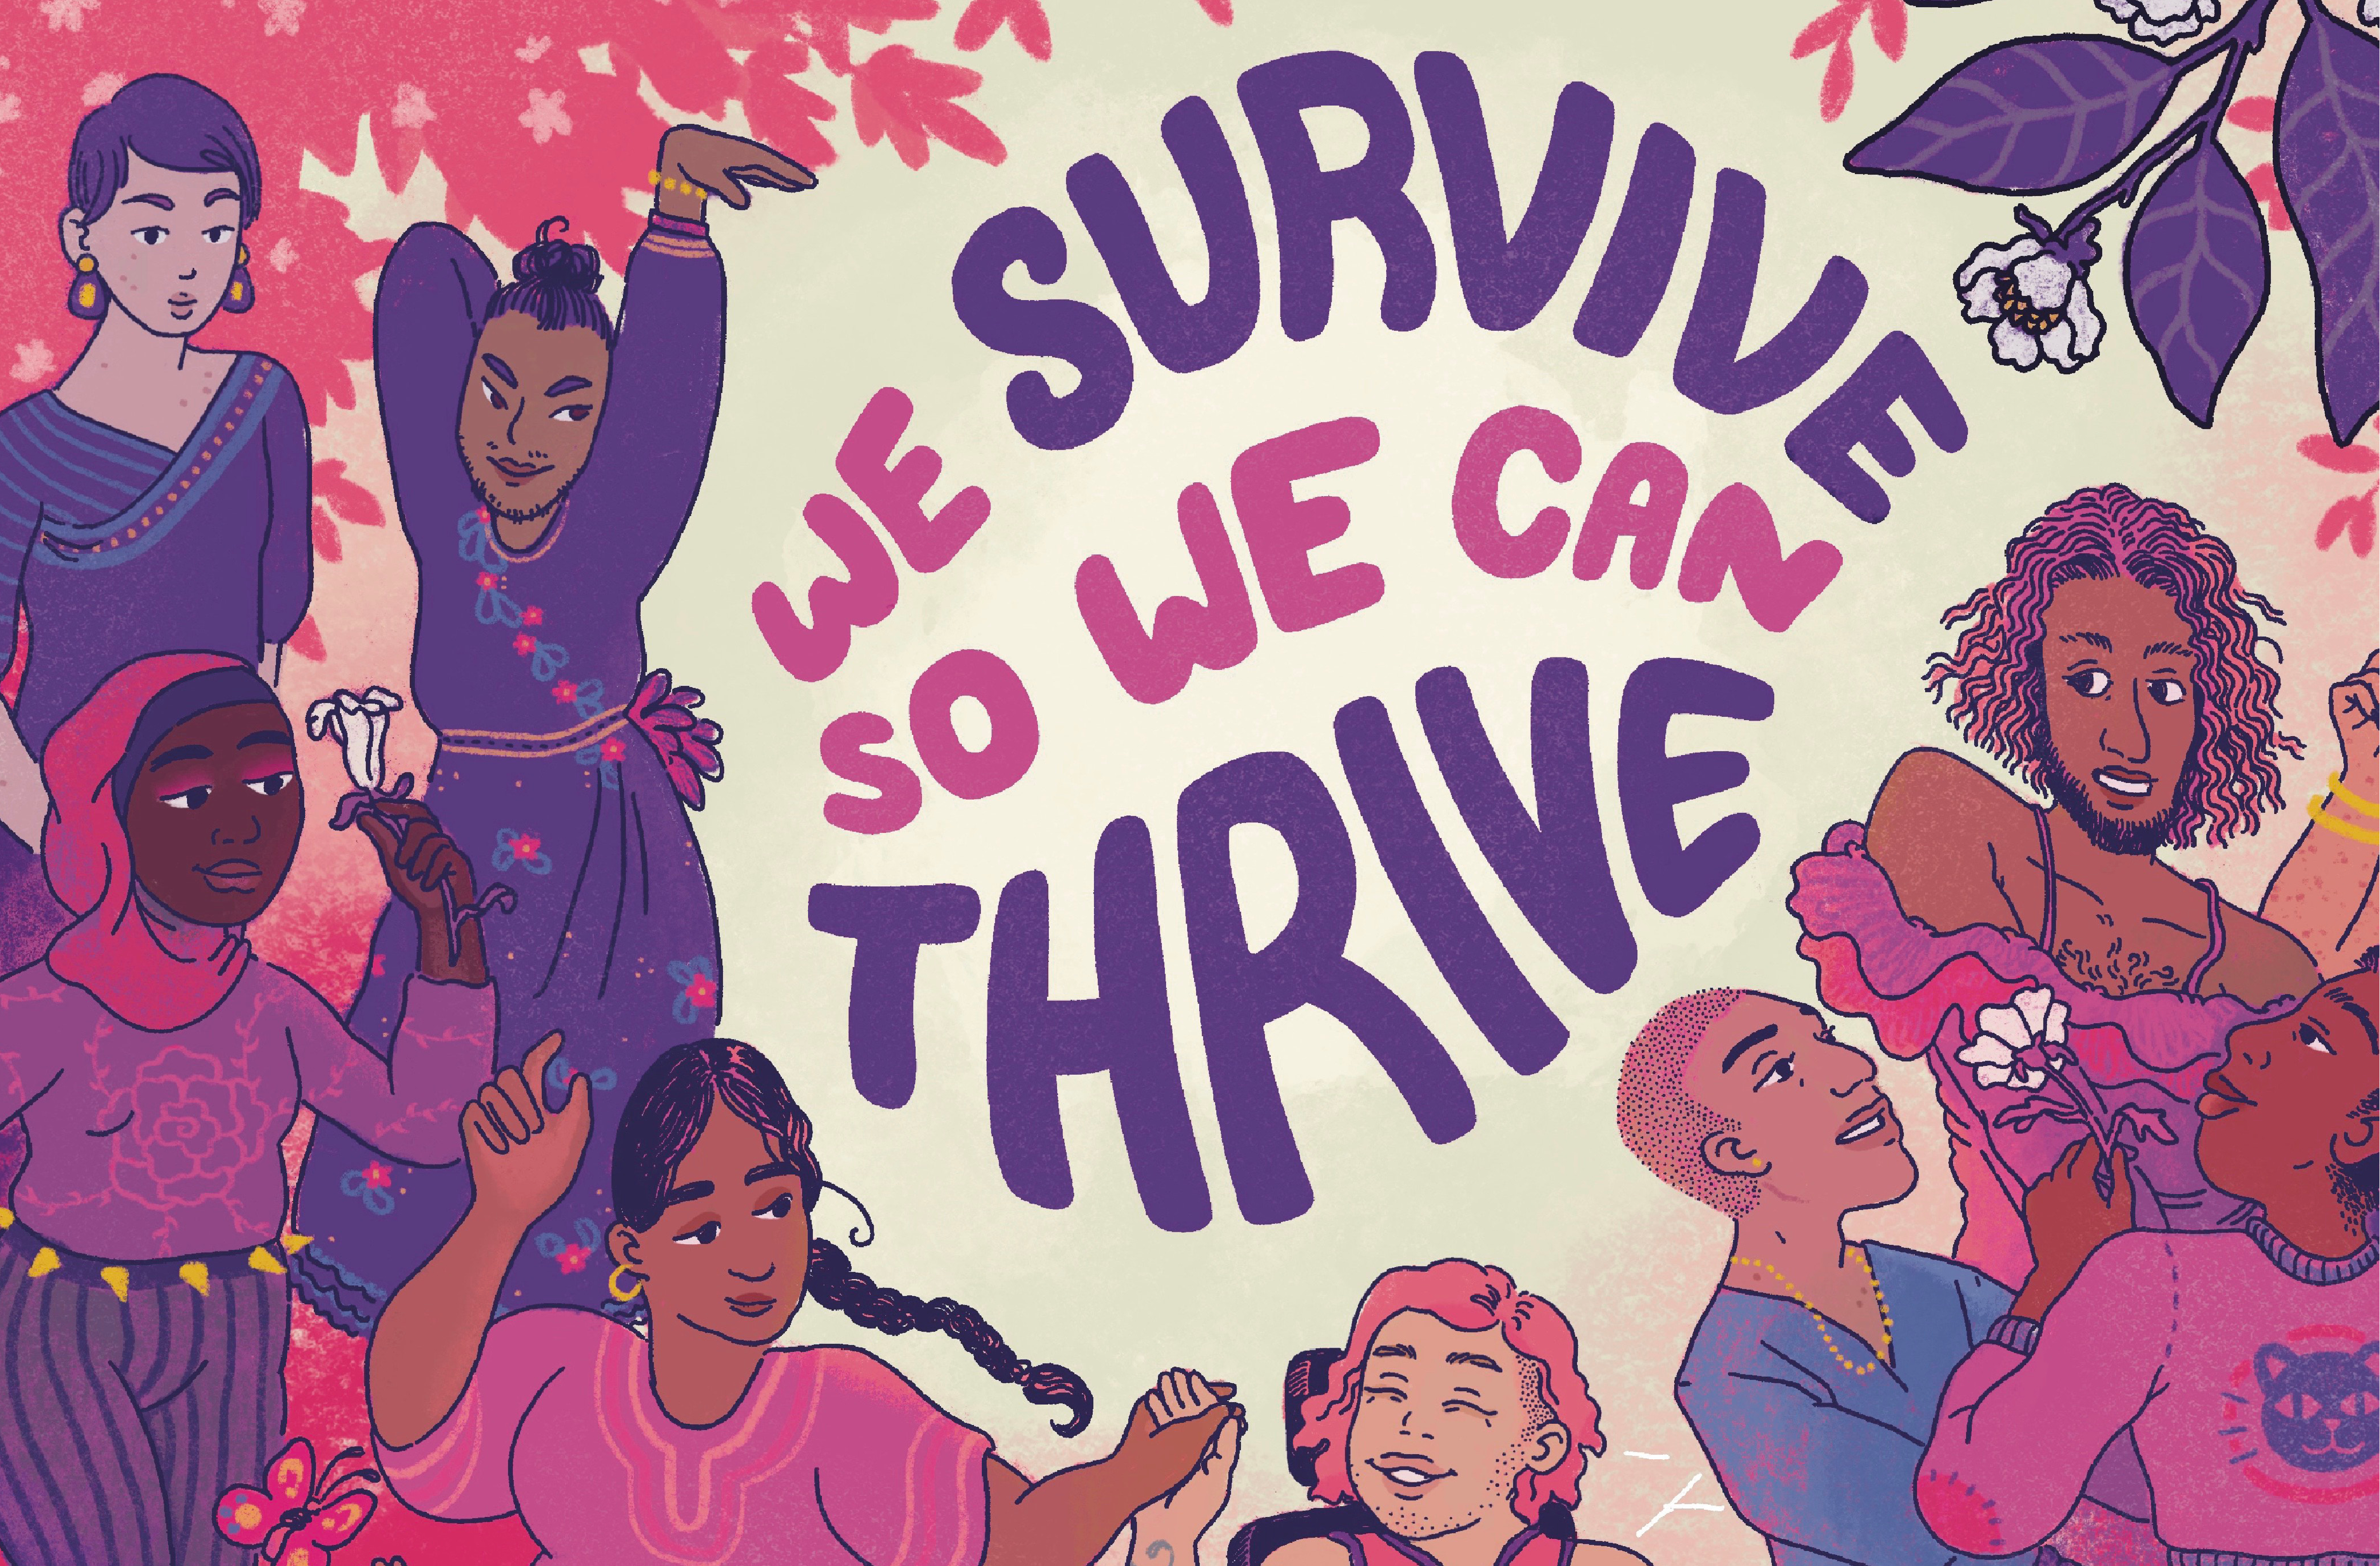 The text "We Survive so we can Thrive" is in pink and purple wavy letters, with illustrated people of many genders, abilities, and races surrounding the text.